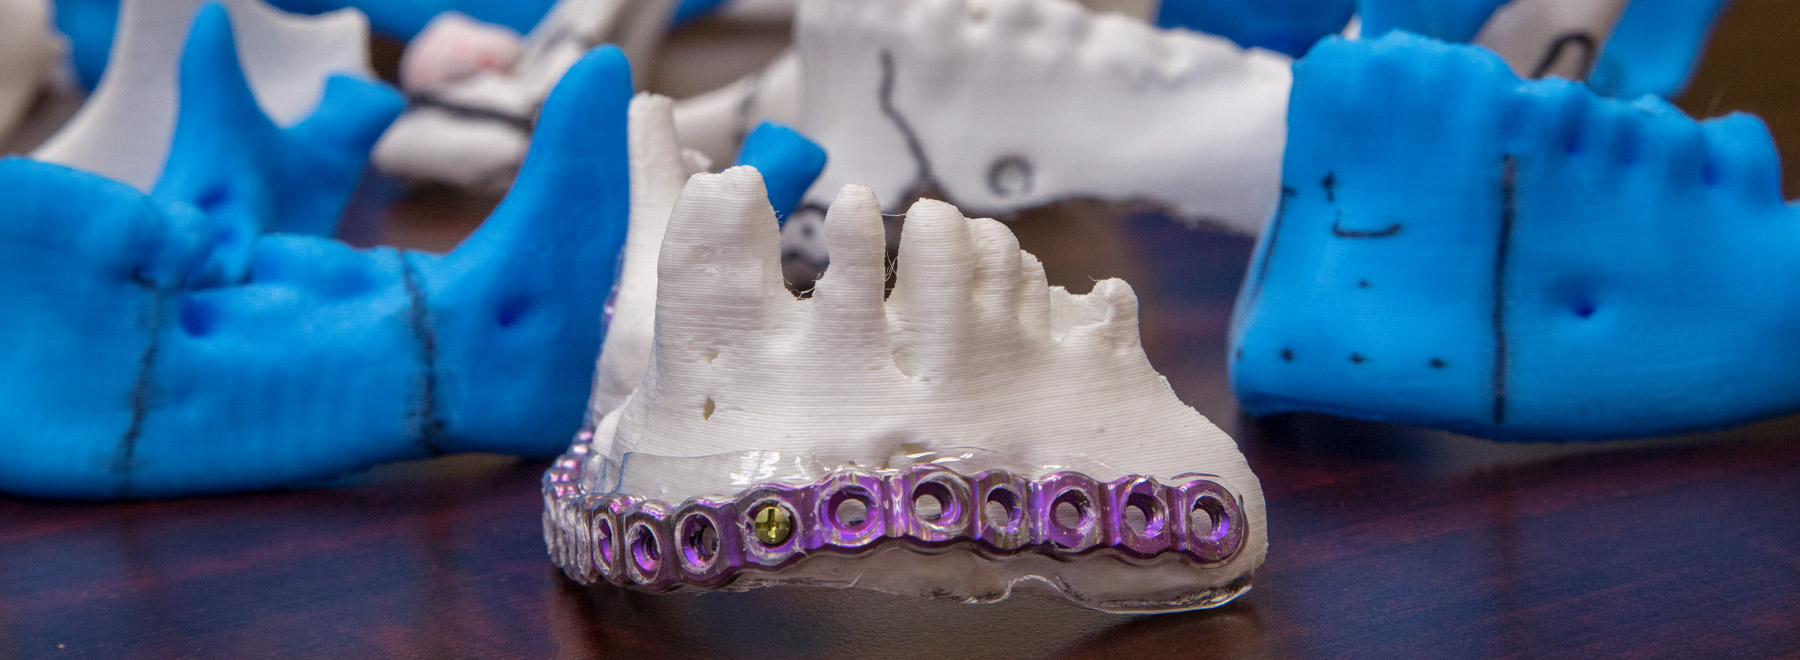 Display of various 3D printed jaws, one with implant attached.